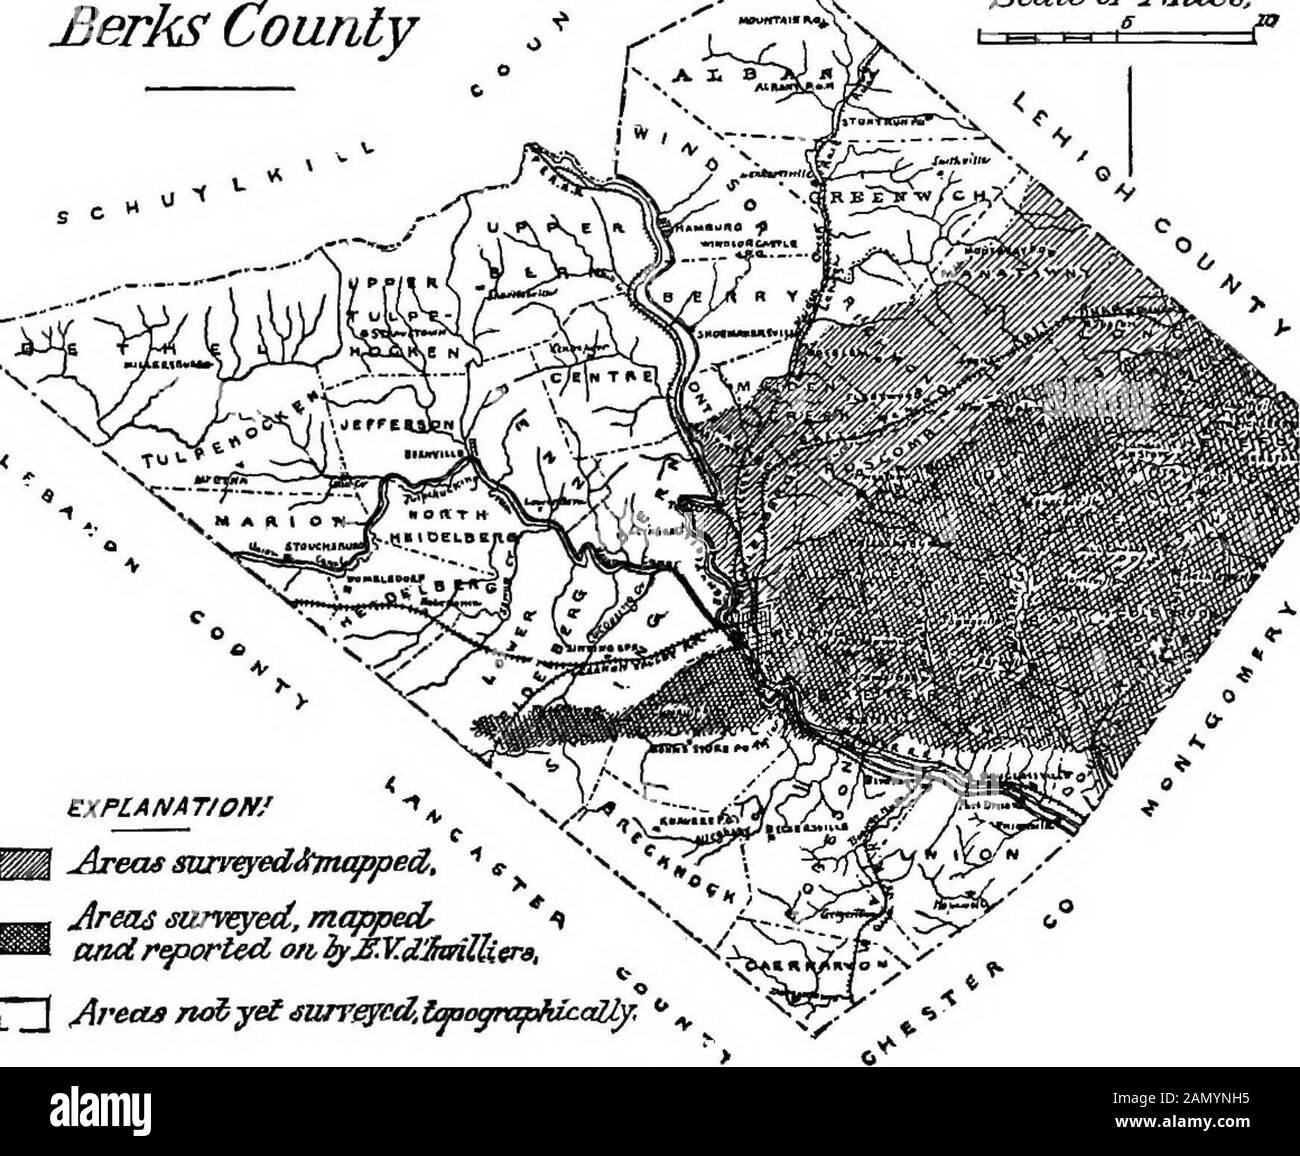 Report of progress 1874-1889, A-Z .. . LETTEK OF Mr. DINYILLIEES. 907 Walnut Street,Philadelphia, July i, 1883.Prof. J. P. Lesley, Slate Geologist: Dear Sir : I have the honor to submit to you my reporton the geology and topography of the South mountains orReading hills of Berks county, with the border of theMesozoic formation on the south included in the county. Map ot £erks County Scale of MUes.. EXPLANAT/om -^ Jireas saneyed, majoxA ?^ I [ greets ru^y^iurFgyai.laangn^tAicaUy, (xiDs.) Xii D REPORT OP PROGRESS. E. V. dINVILLIERS. In accordance with instructions received from you in thespring Stock Photo